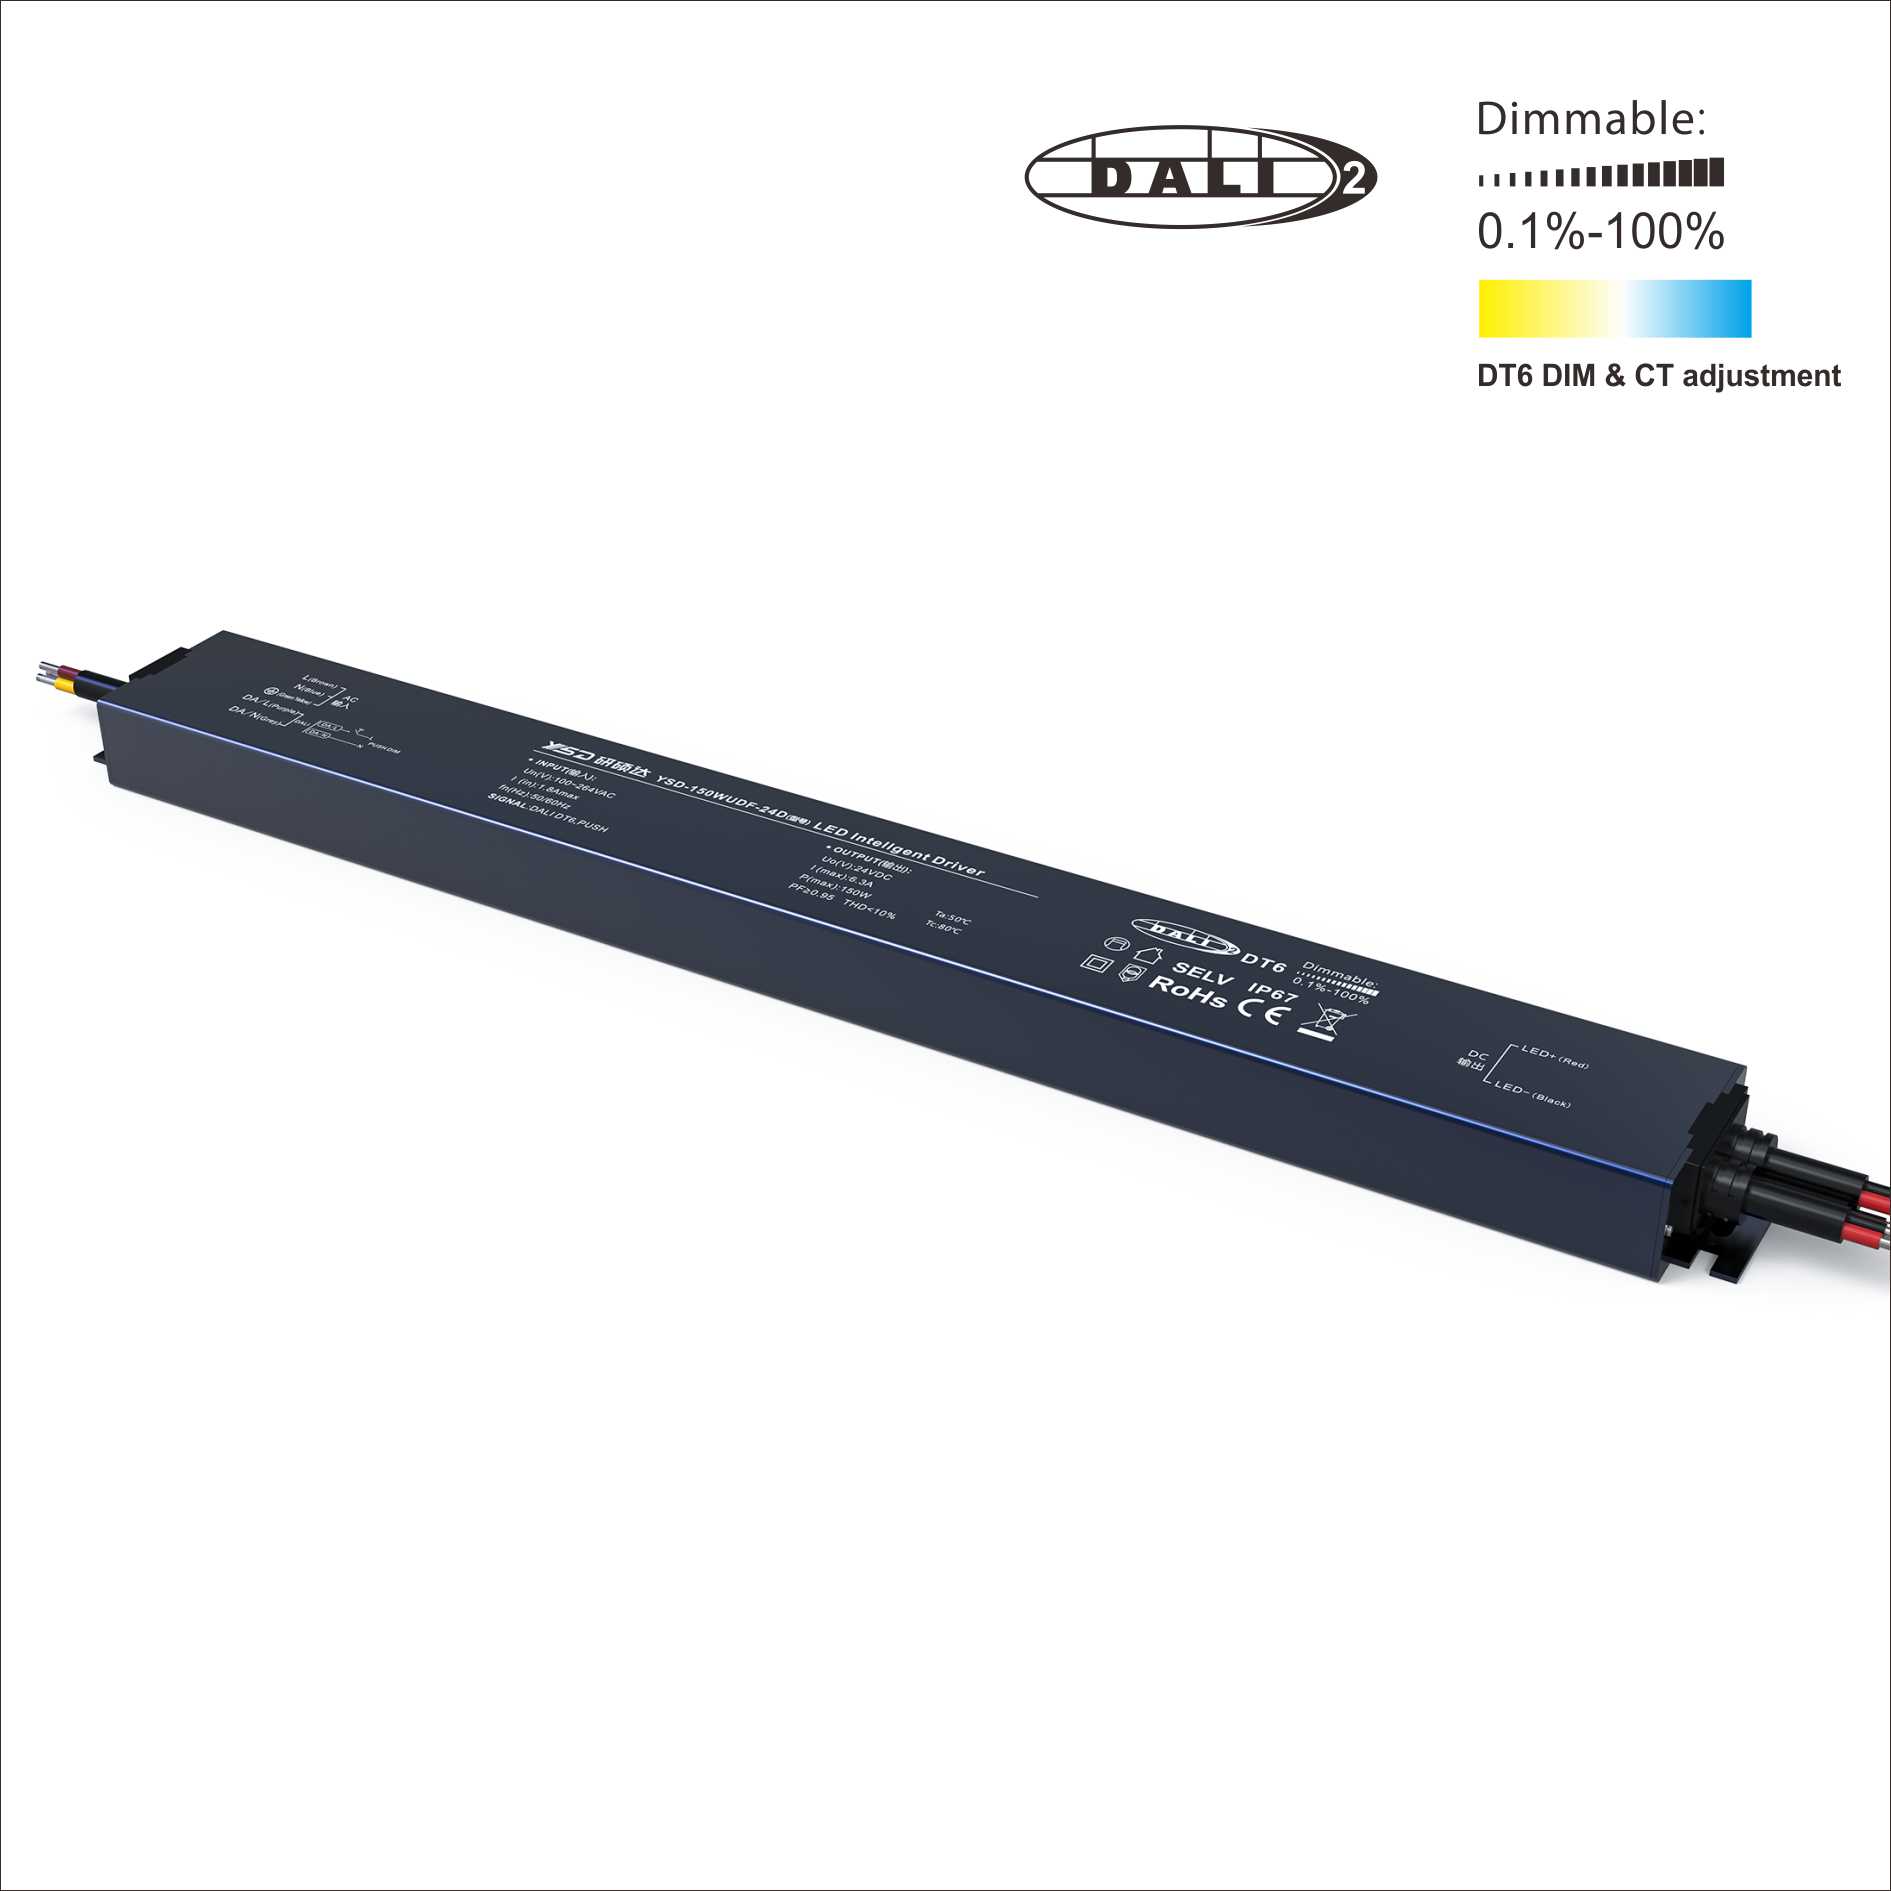 12/24V 150W DALI DT6 PUSH  Dimmable Waterproof LED Power Supply